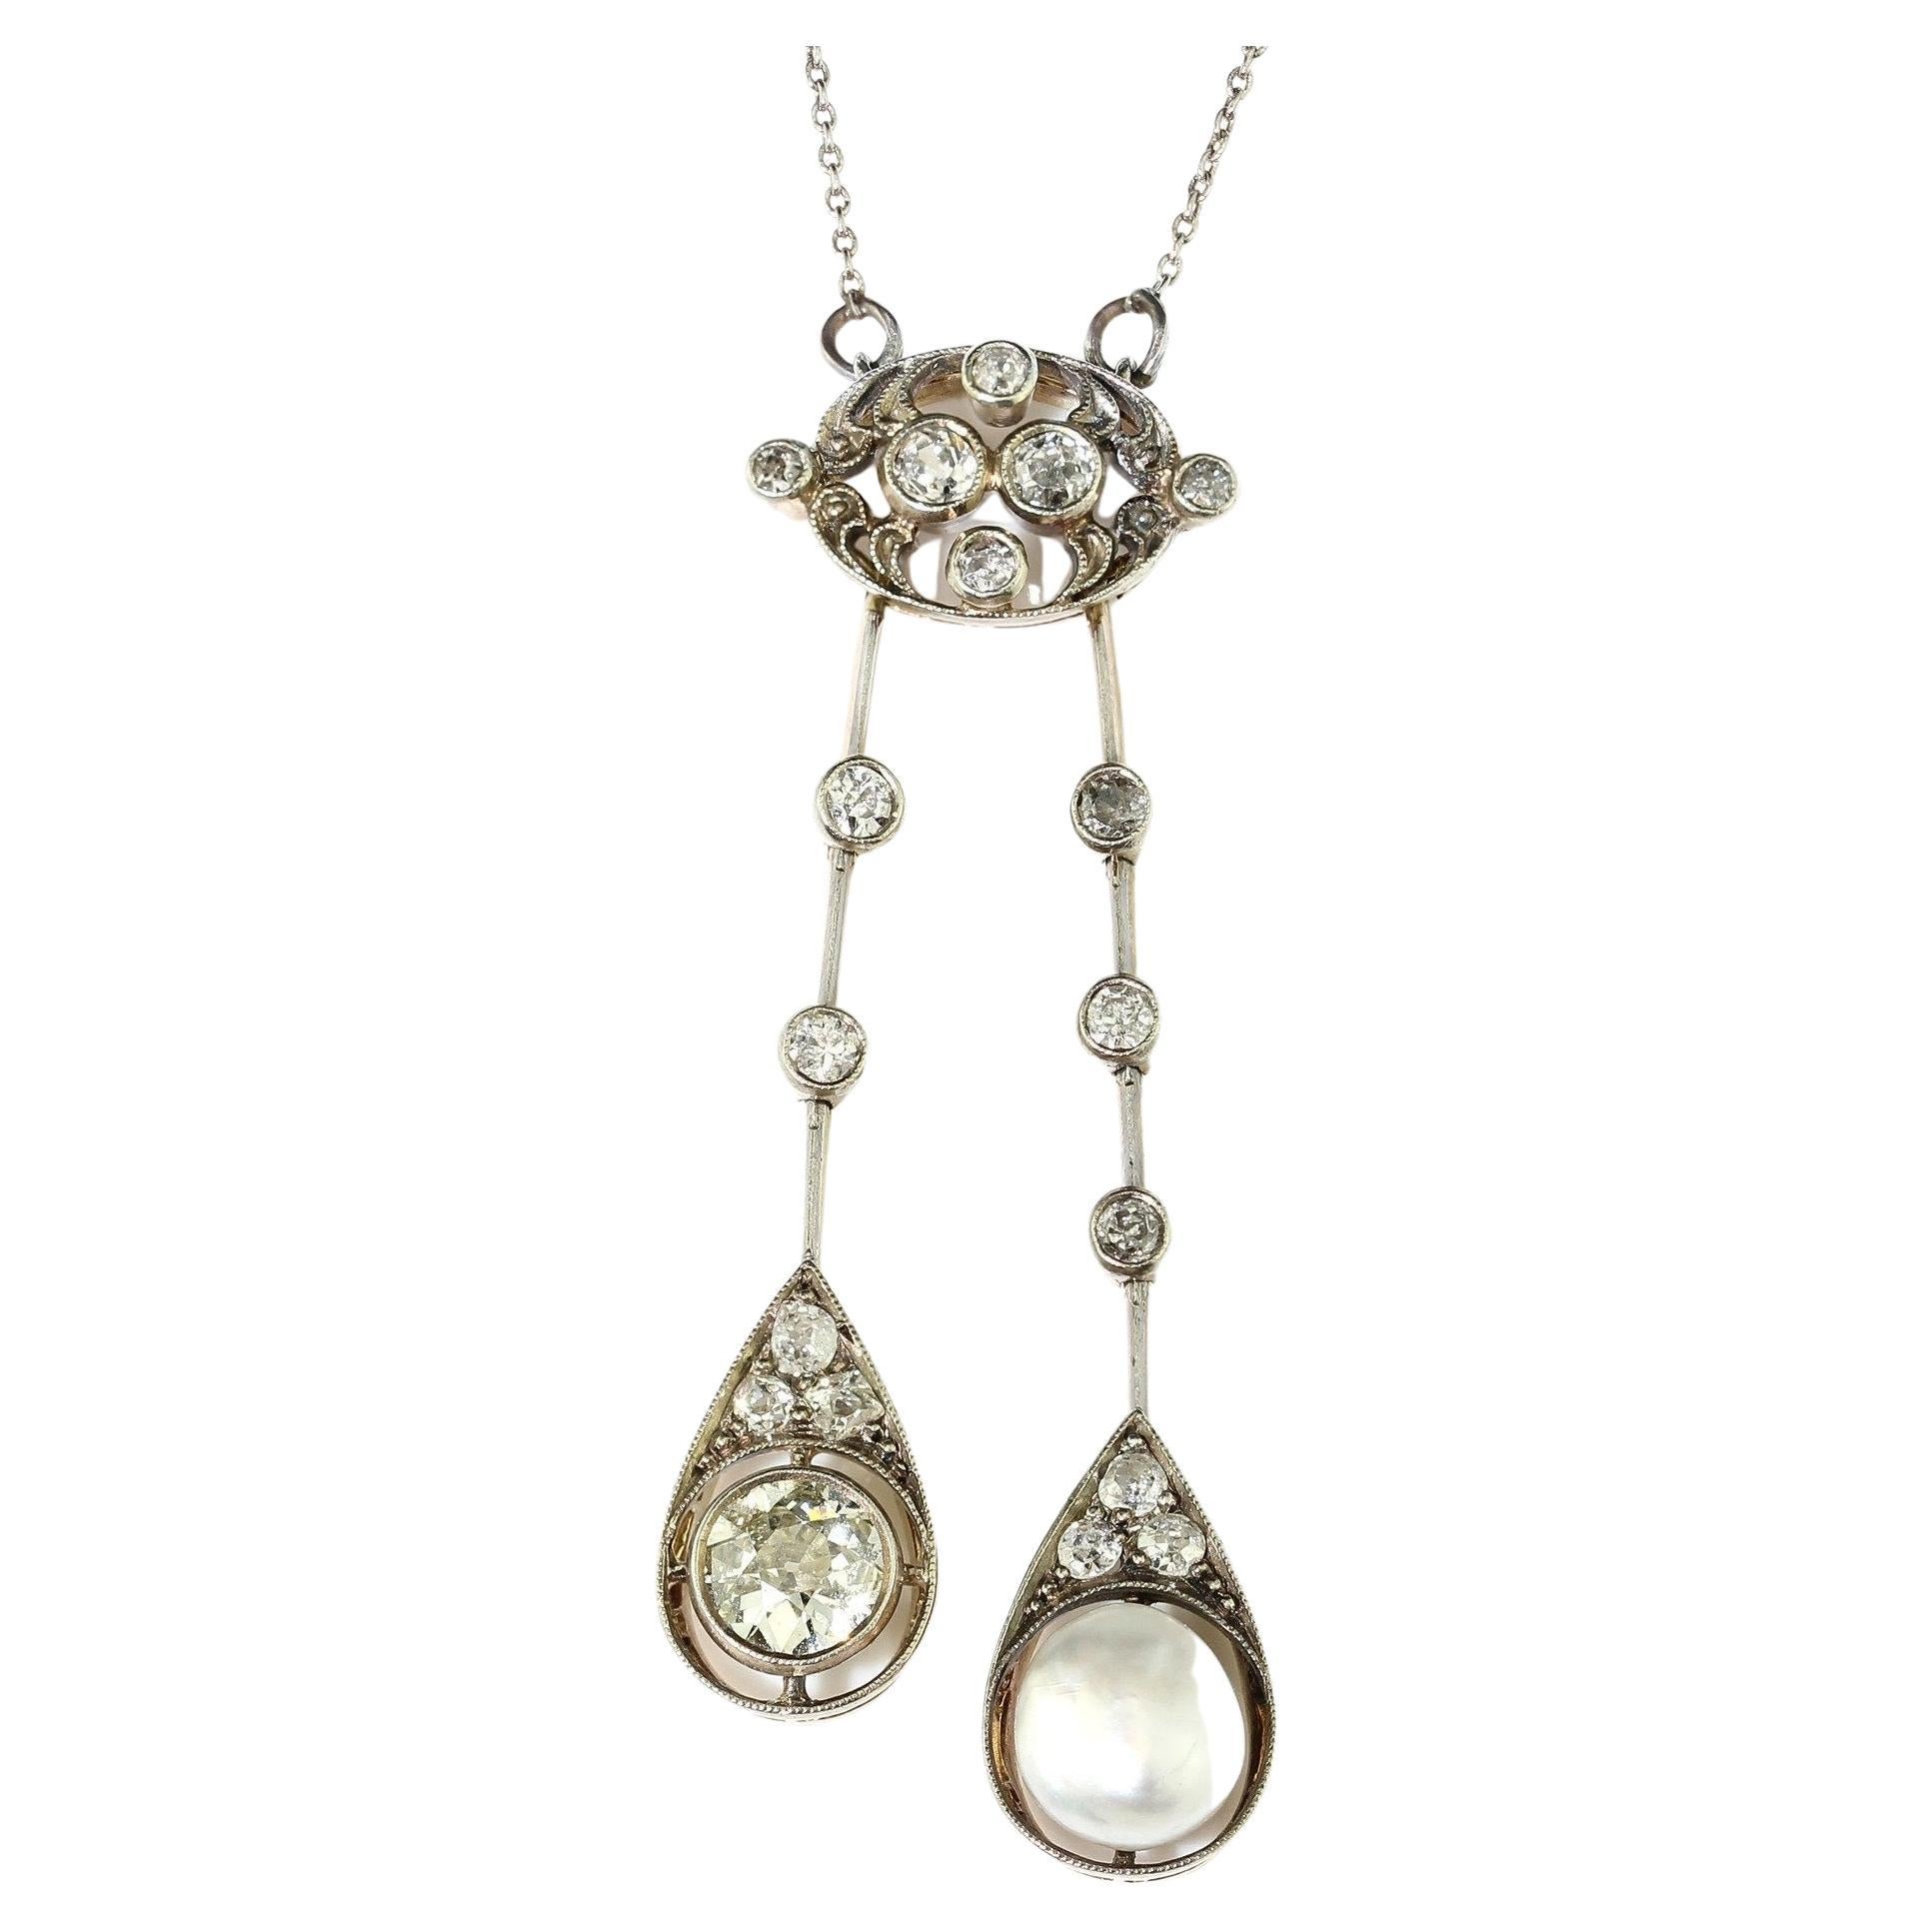 Edwardian 18kt gold necklace, featuring a stunning diamond and pearl pendant. 